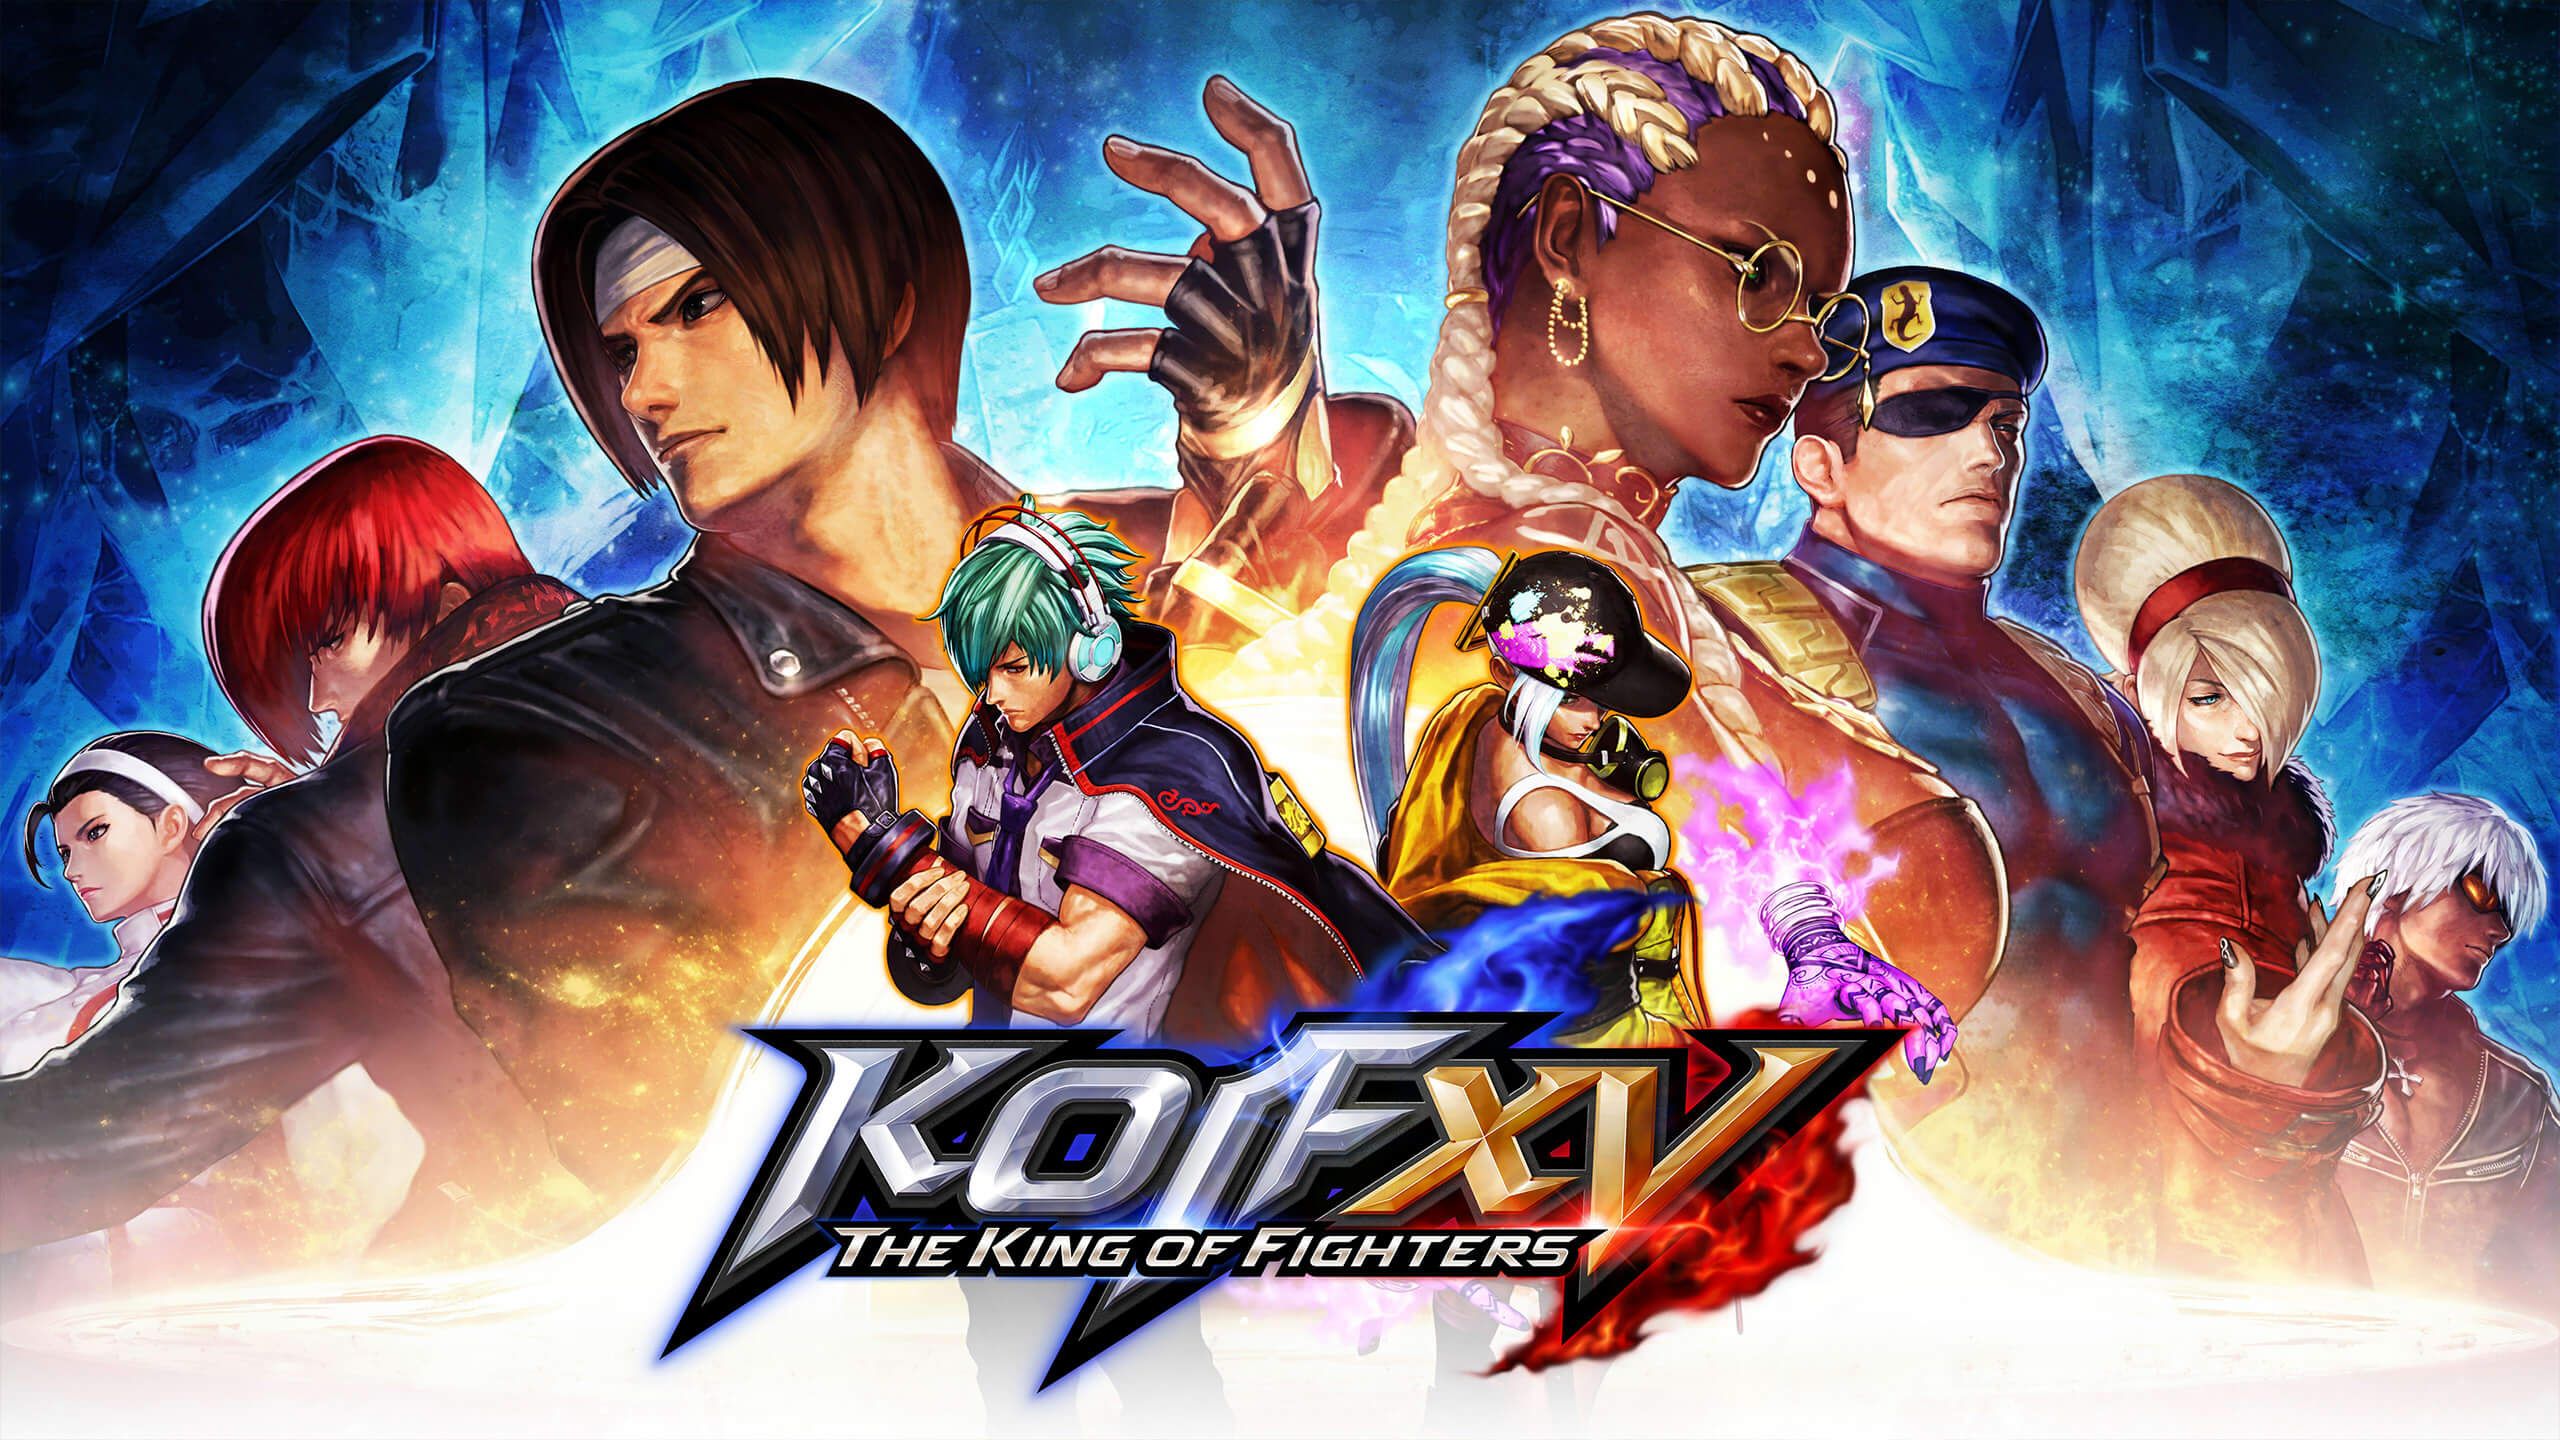 King of Fighters XV Version 1.52 Patch Notes